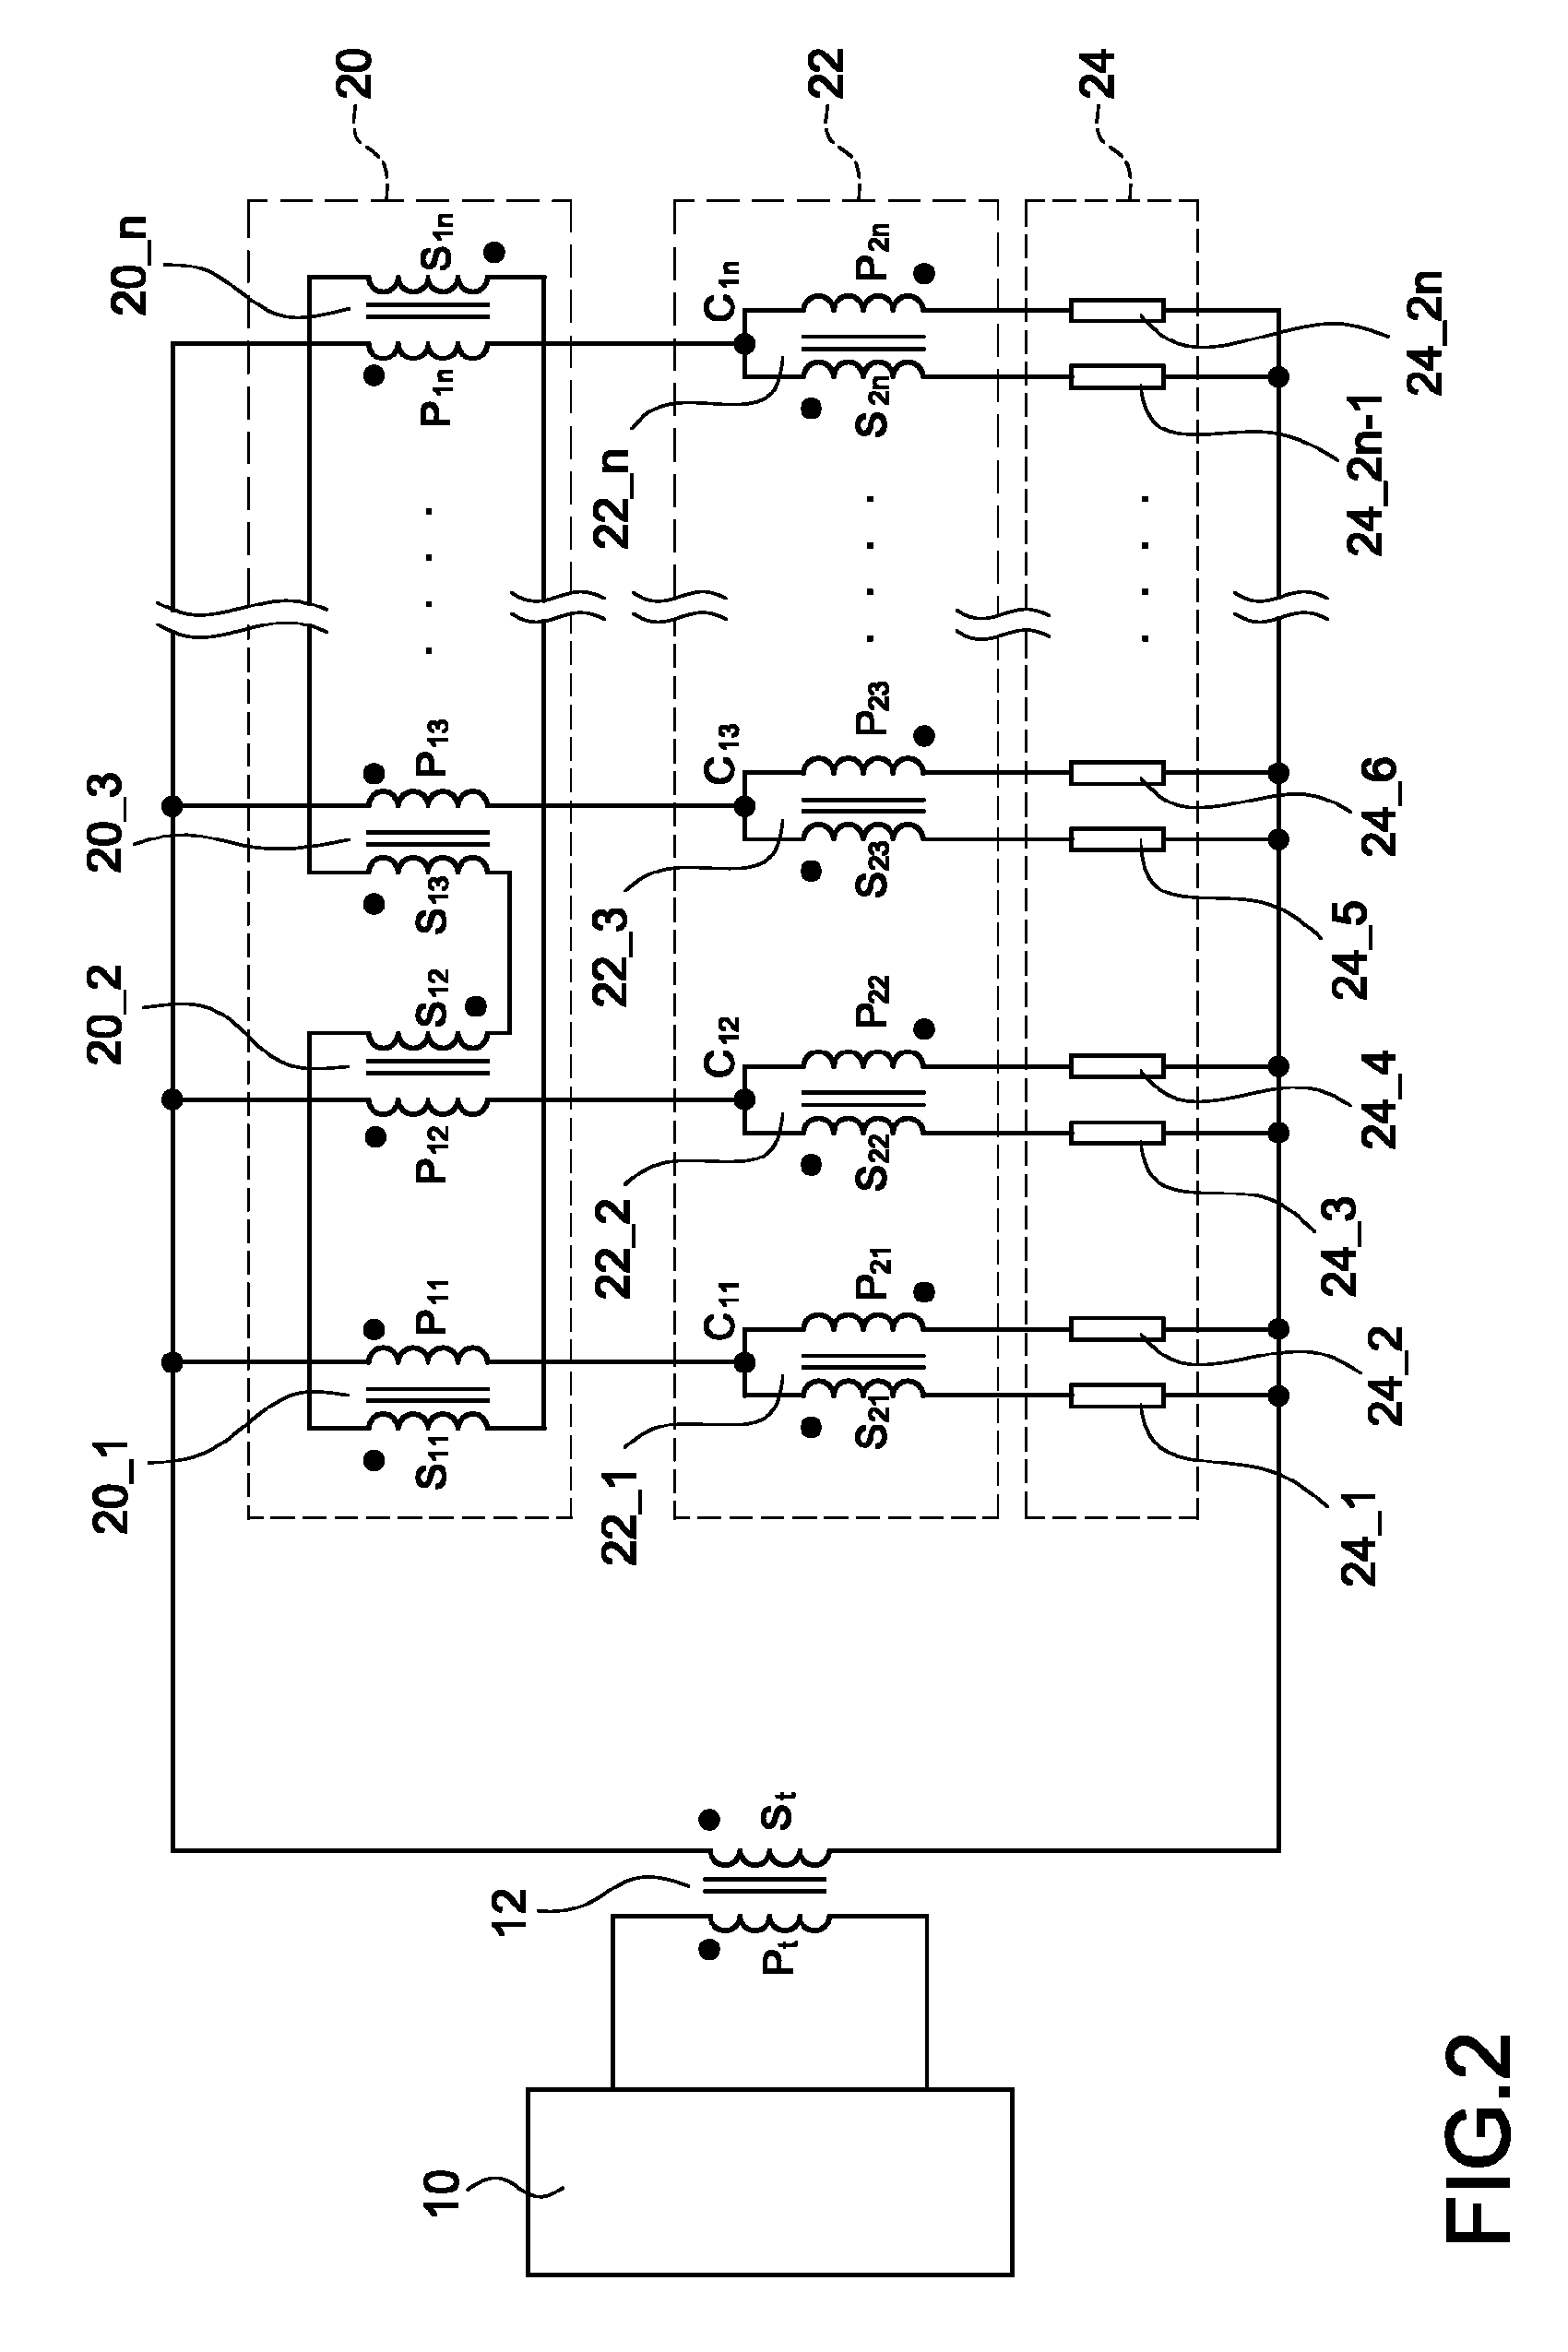 Two-stage balancer for multi-lamp backlight